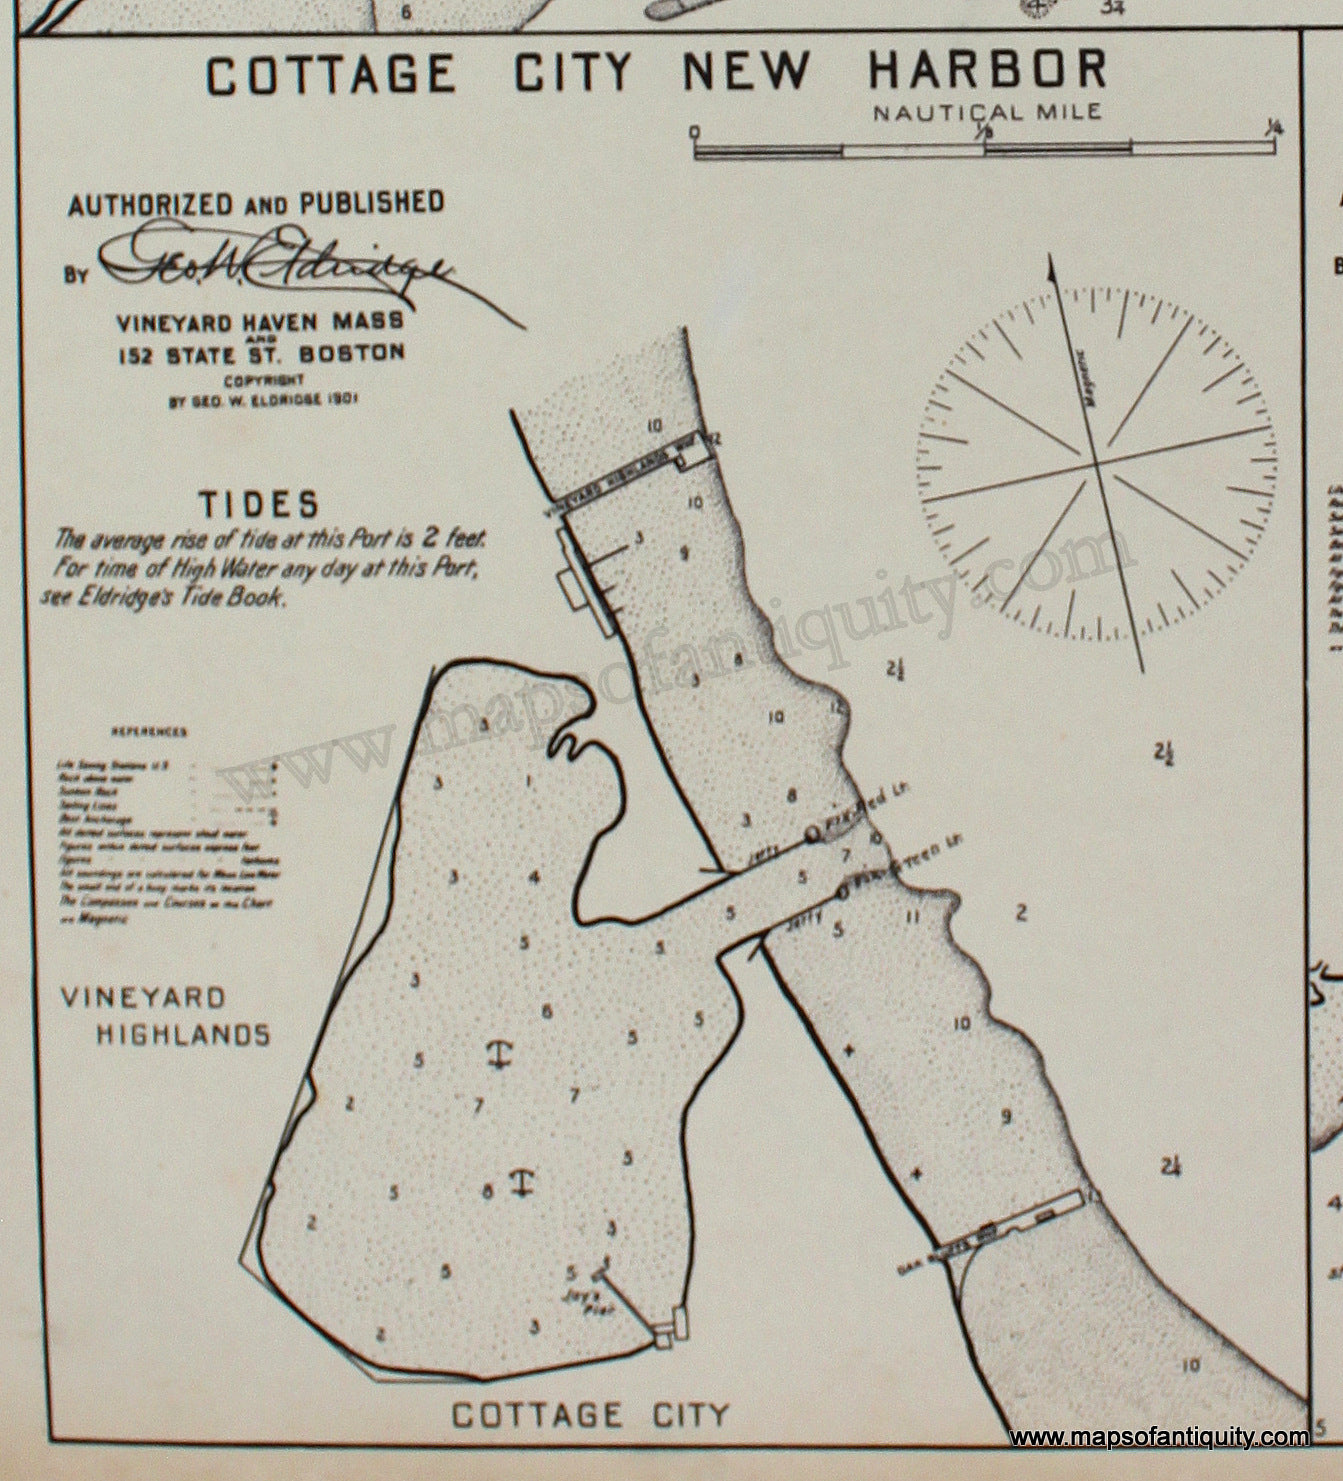 Reproduction-Cotuit-Port-and-Osterville-Cottage-City-New-Harbor-and-Chatham-Mass.---Reproduction-1901-Eldridge-Cape-Cod-and-Islands--1900s-20th-century-Maps-of-Antiquity